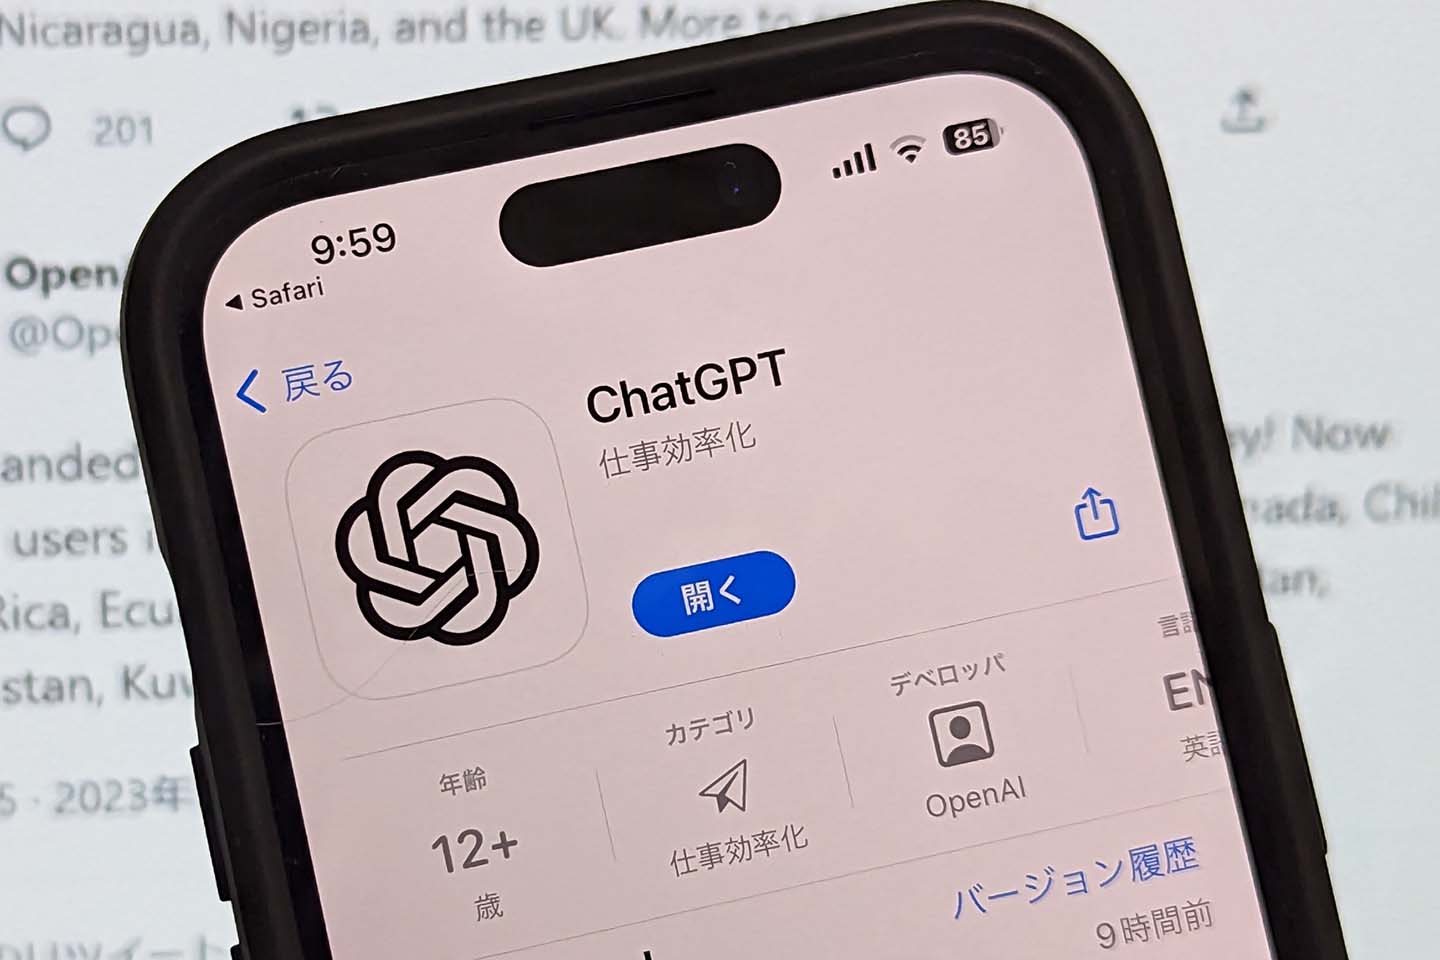 ChatGPT IOS App - Guide to Access On iPhone